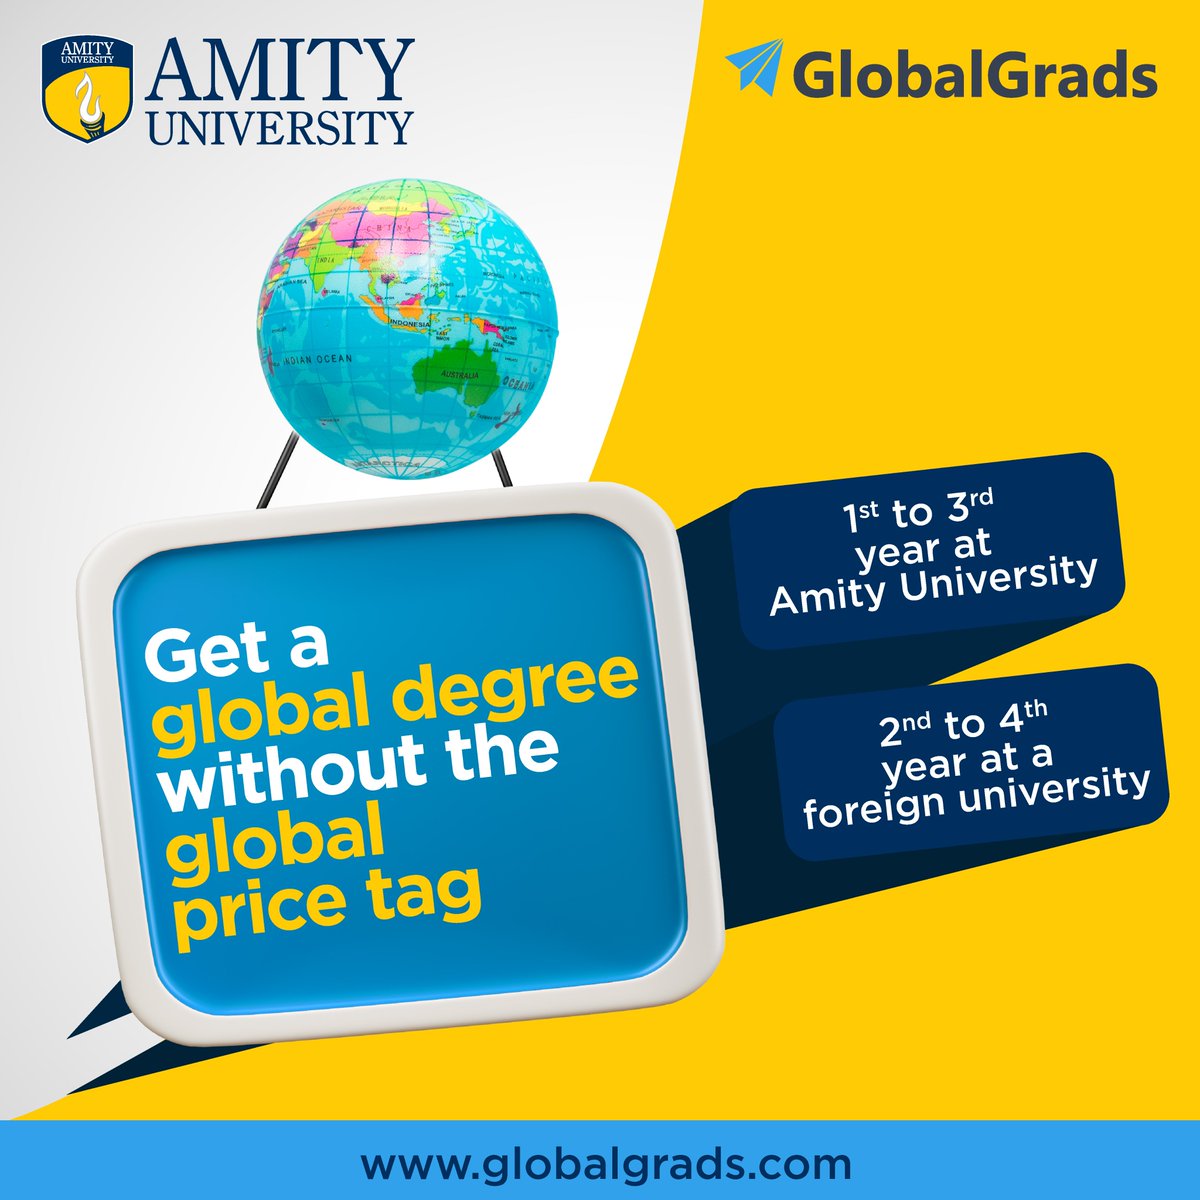 Unlock global education affordably: Begin at Amity University, then conquer the world with a foreign degree!

#GlobalGoals #Amity #amityuniversity #globaleducation #TravelAndExplore